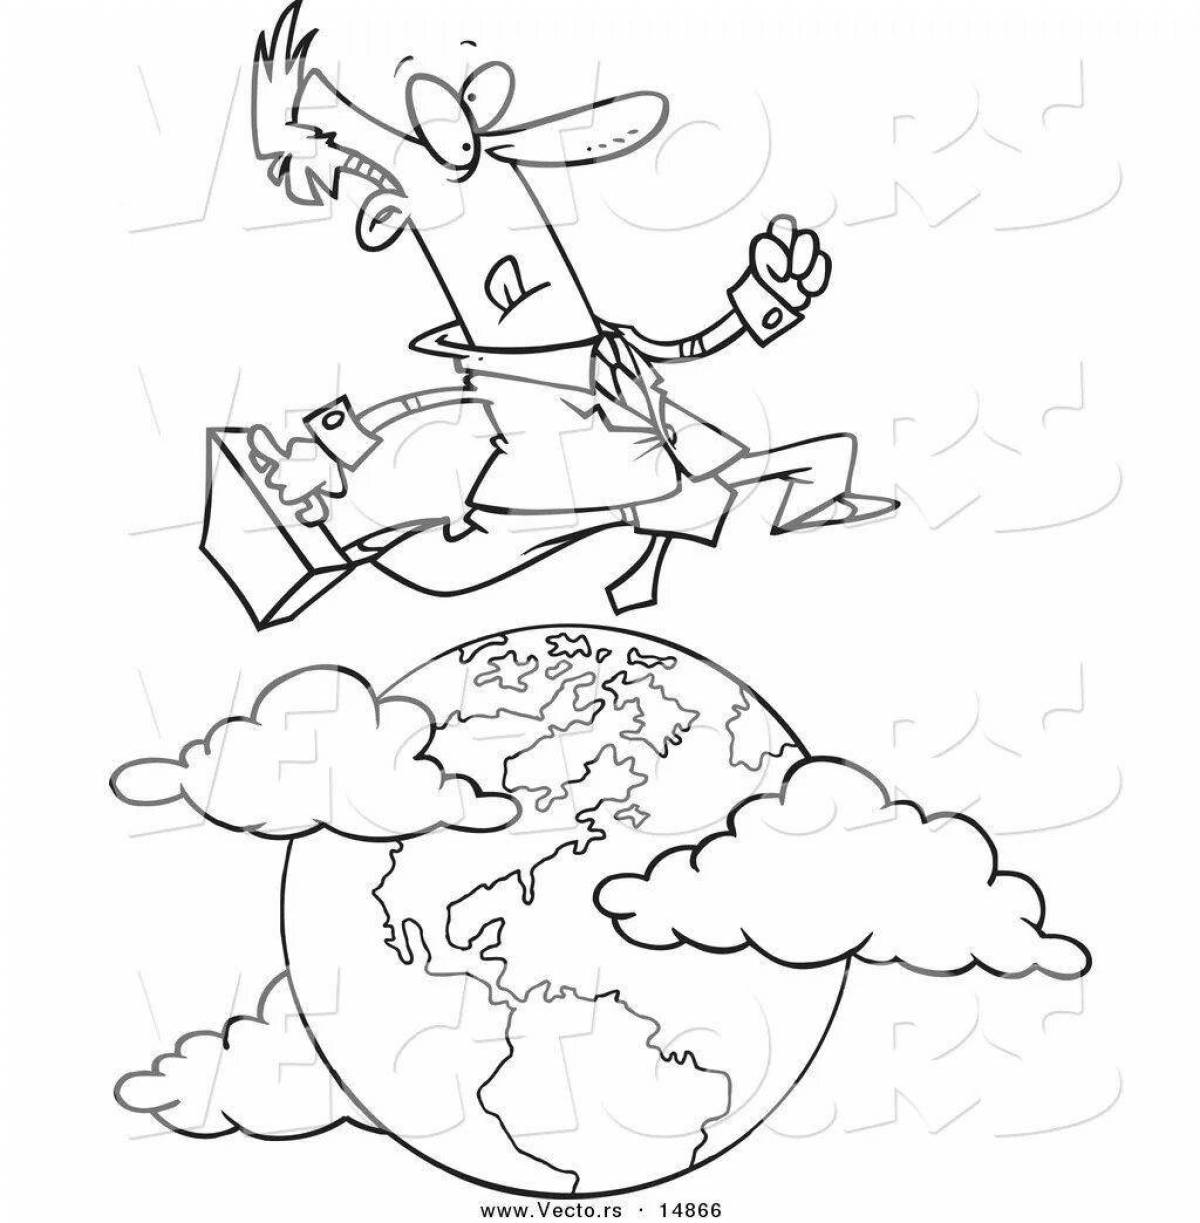 Incredible travel coloring pages for kids